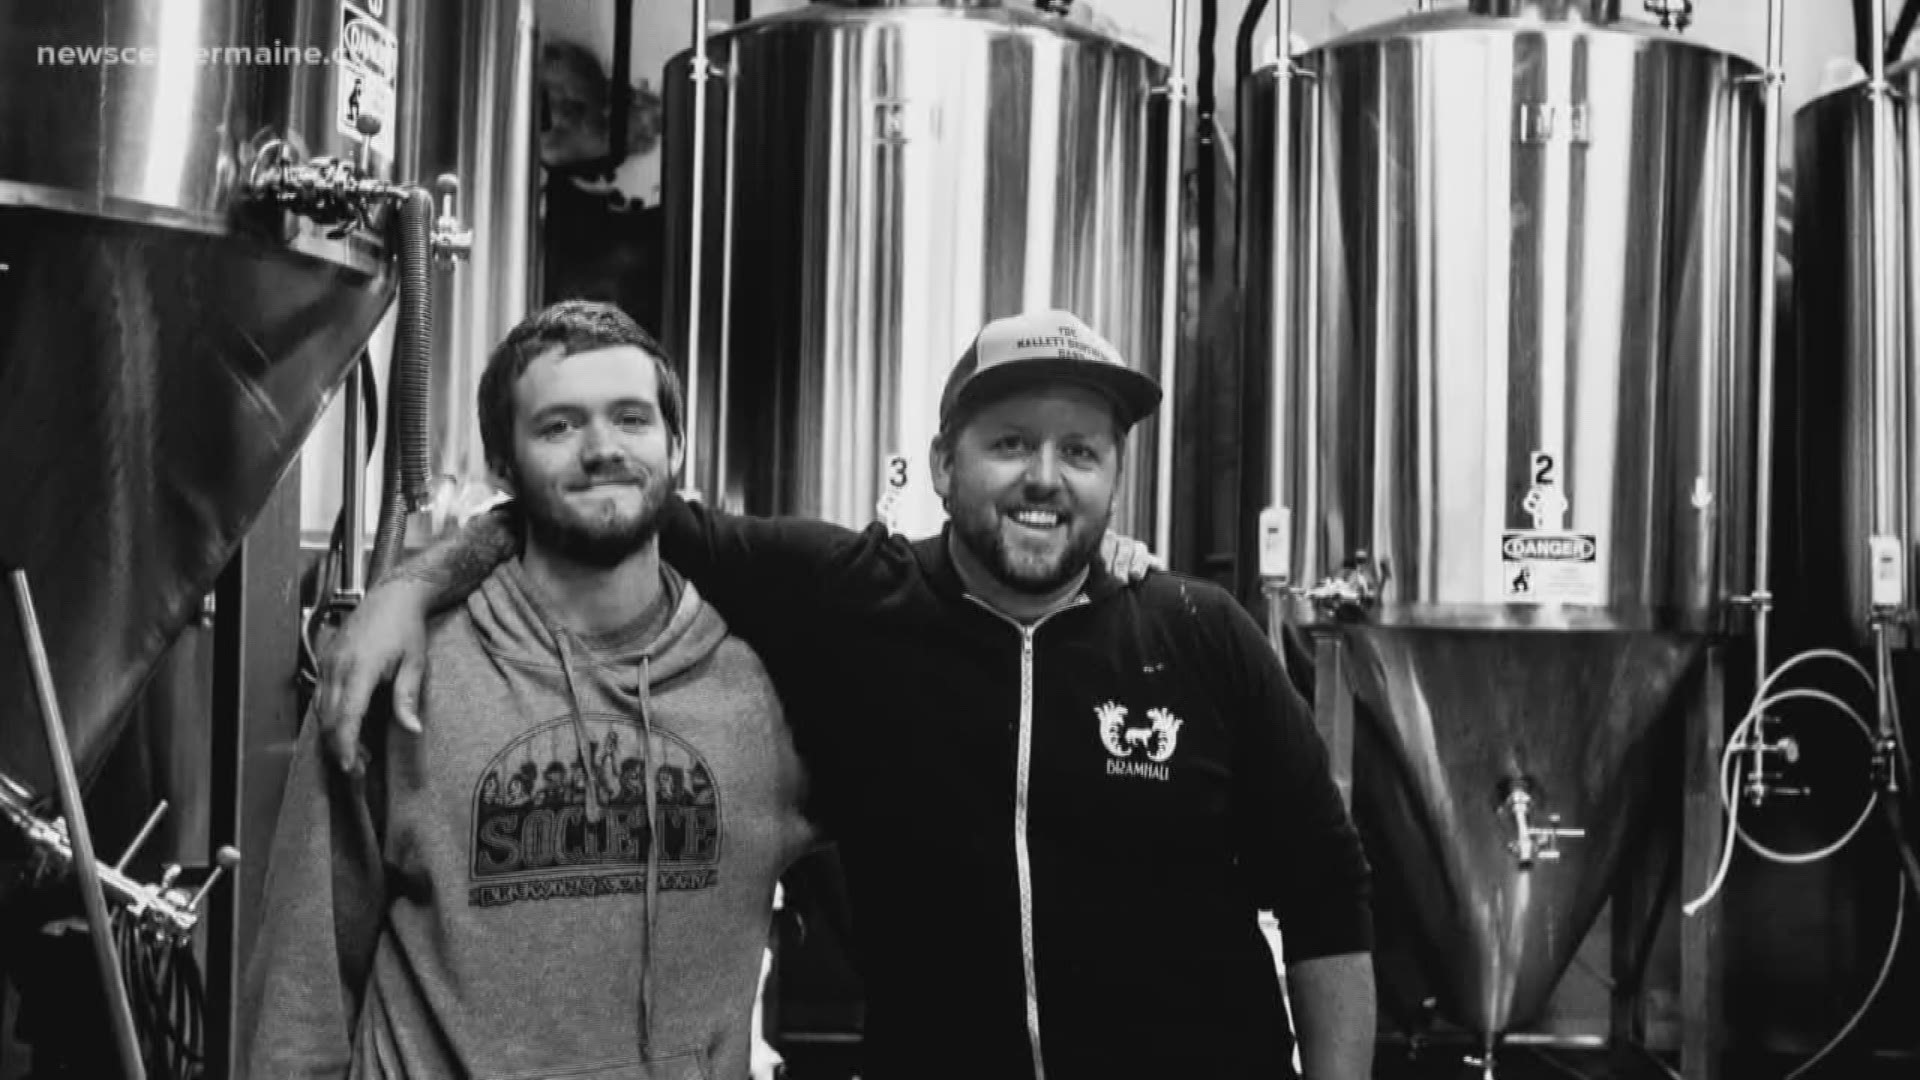 A family business, two brothers and a father, have made a mark in Maine brewing, one barrel at a time.